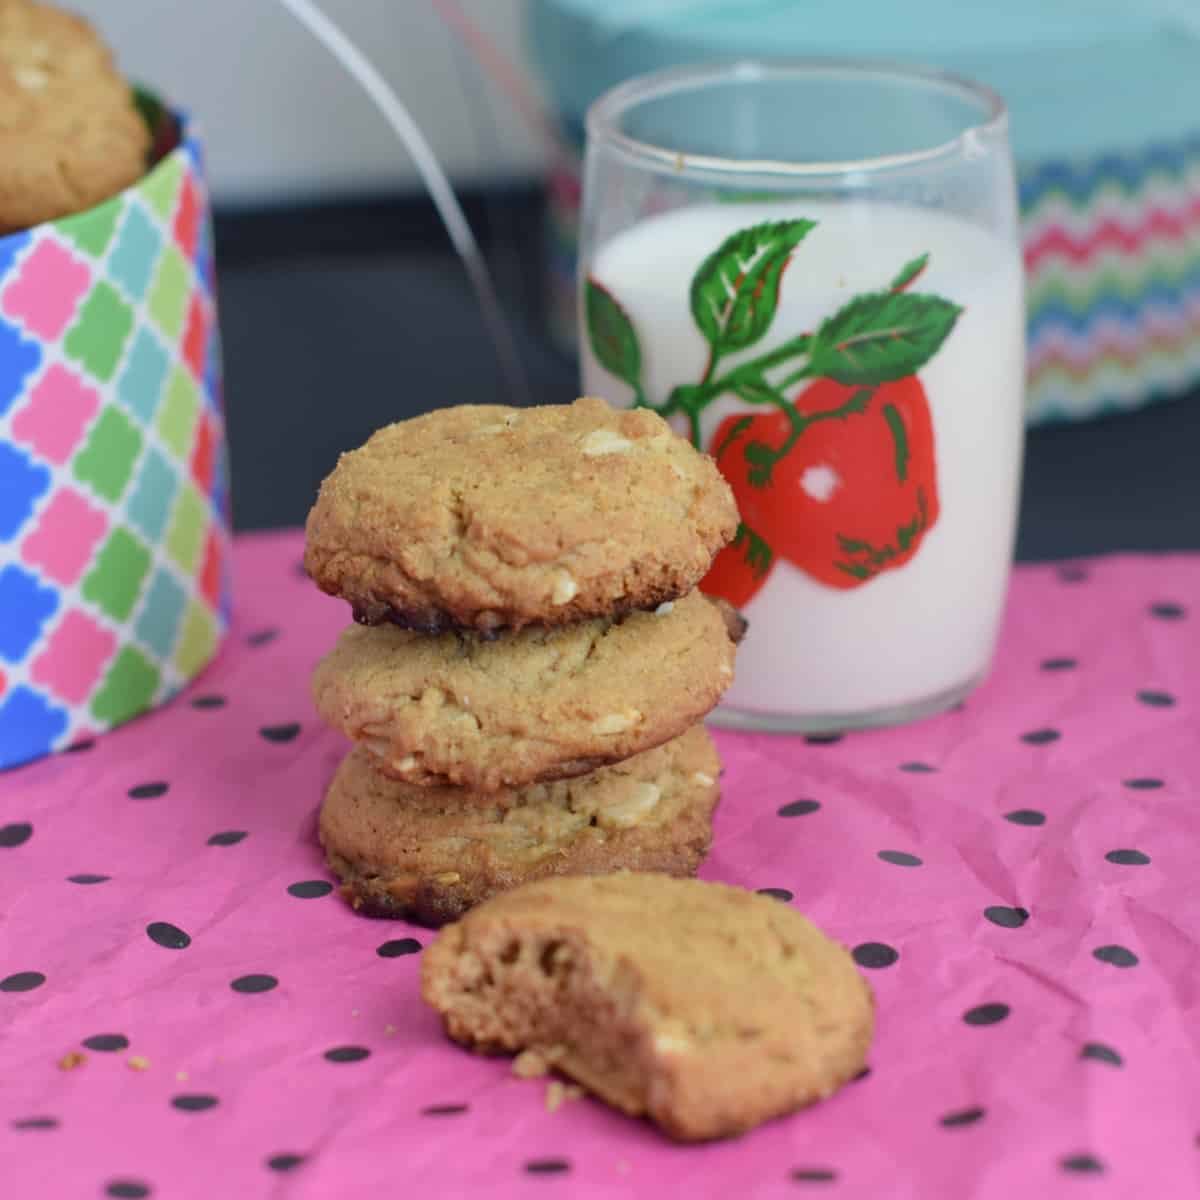 A stack of thick almond butter cookies on.a bright pink mat with a glass of milk.